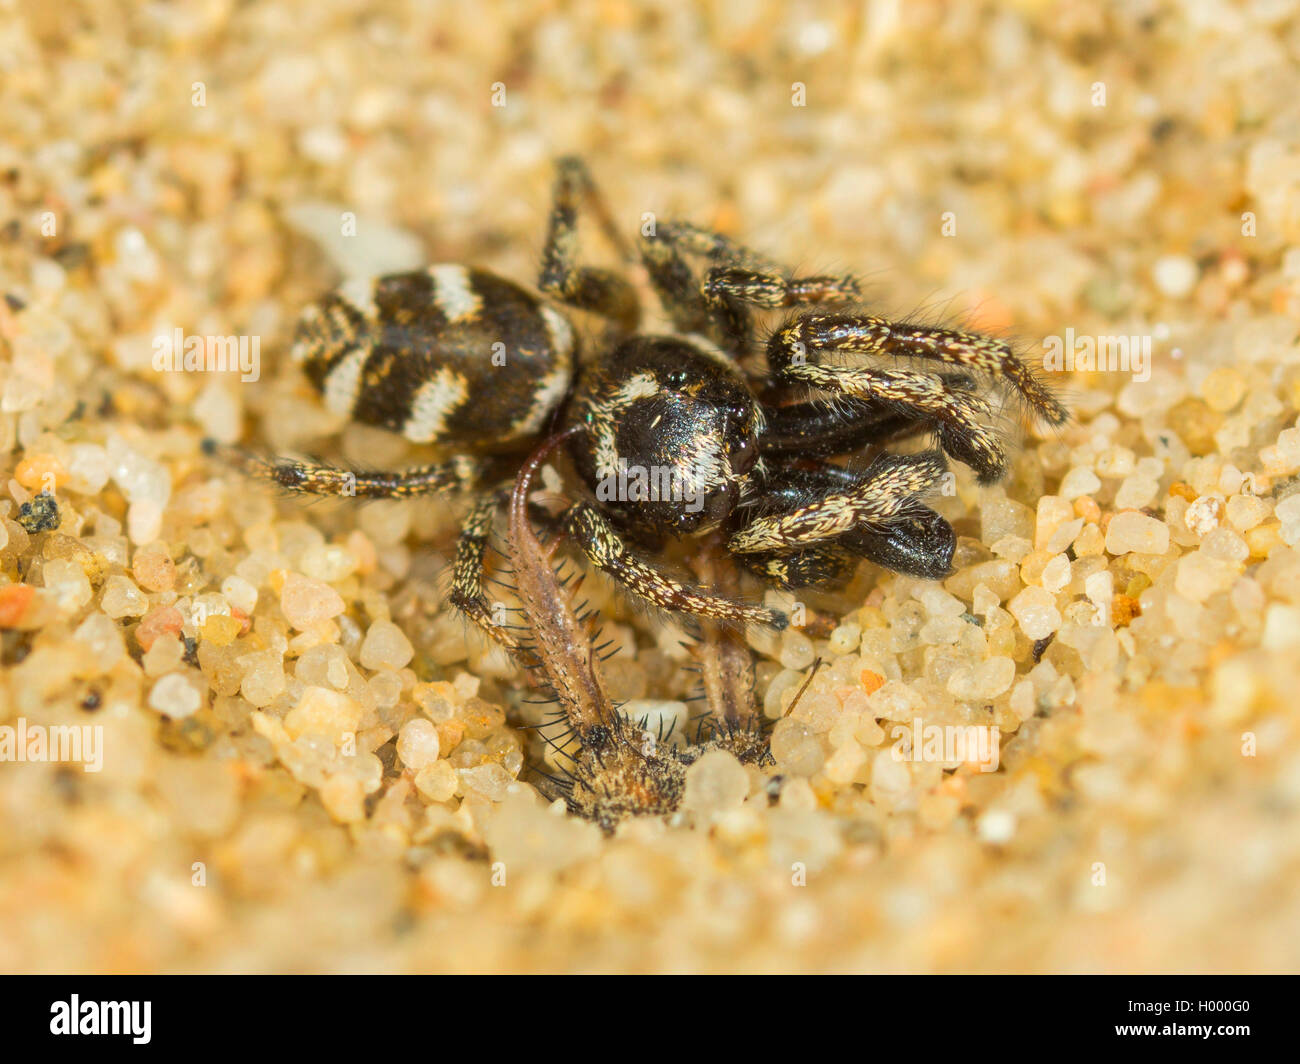 European antlion (Euroleon nostras), Mature Antlion sucking a captured Zebra Spider (Salticus scenicus) at the ground of the conical pit, Germany Stock Photo